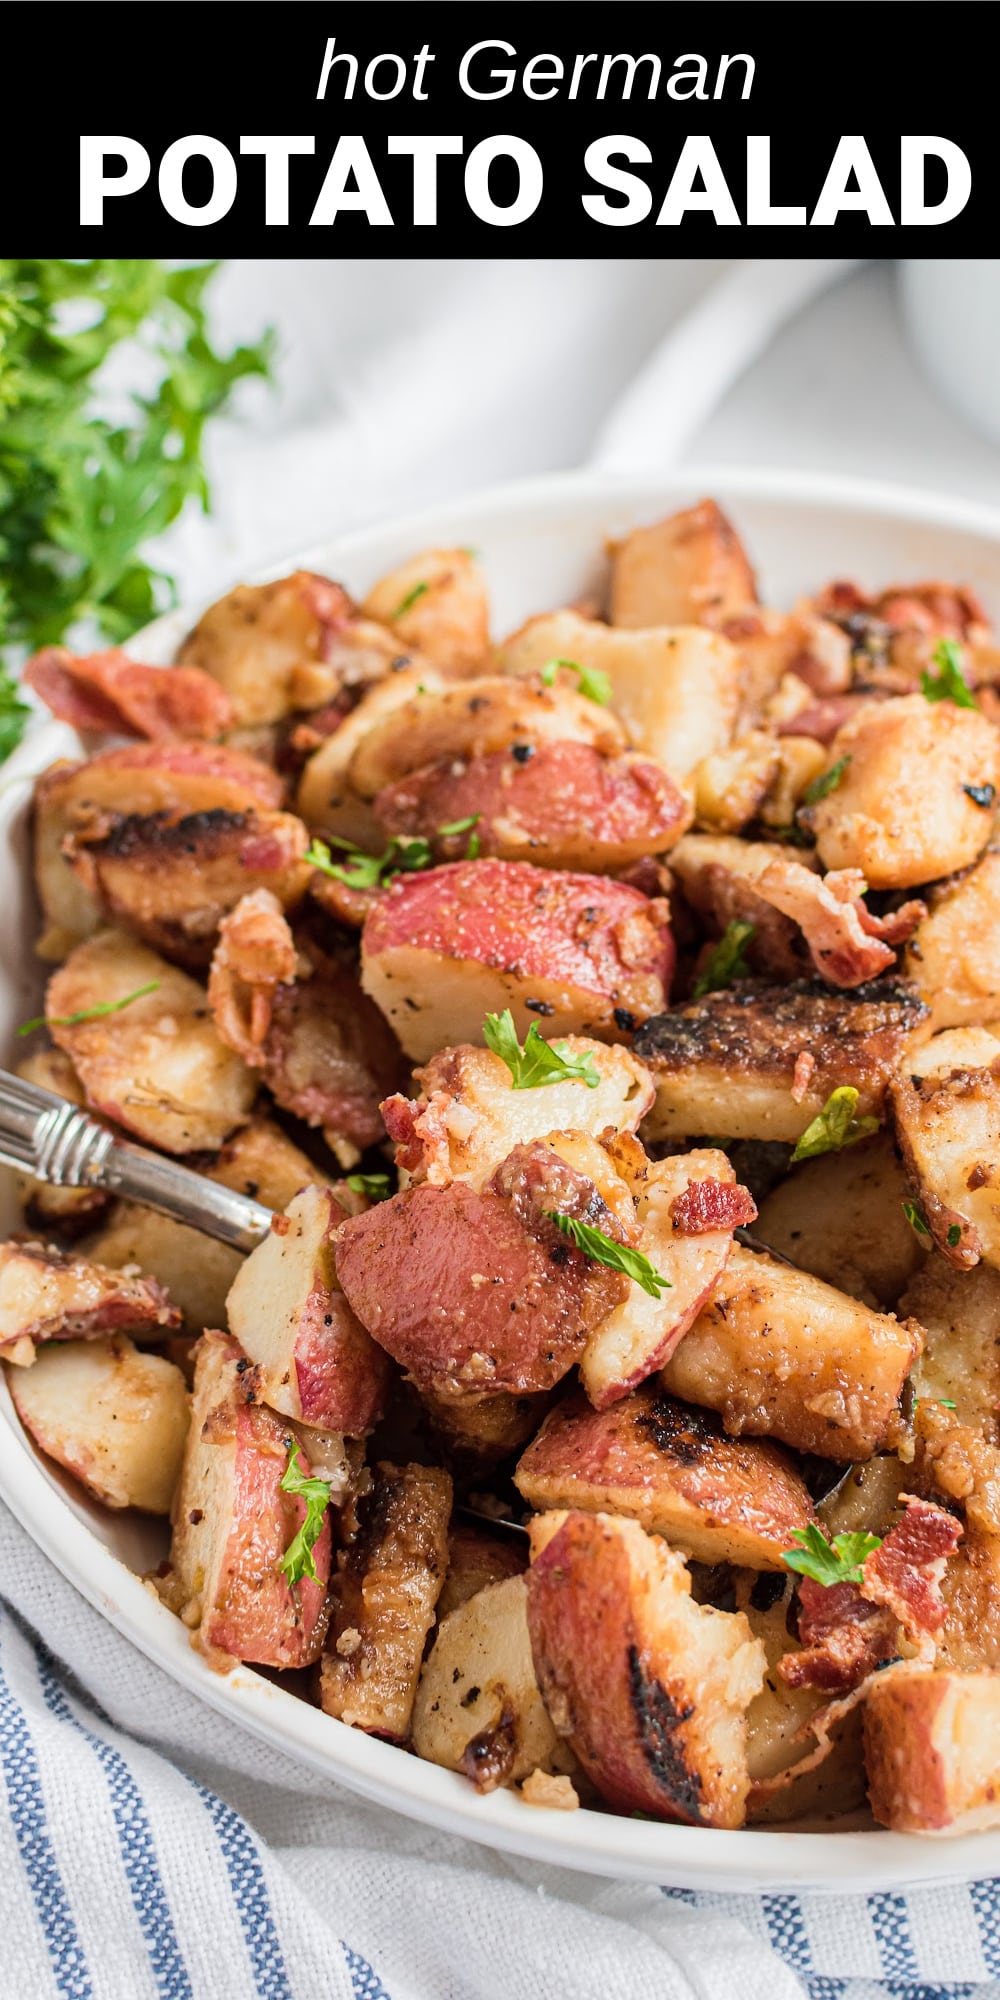 This Hot German Potato Salad Recipe with tender red potatoes, smokey bacon, and a delectable tangy dressing is the perfect side dish for just about any meal you choose. And because it's dairy-free, you can serve it warm or cold, making it an awesome choice to take on picnics or to serve at a backyard BBQ.